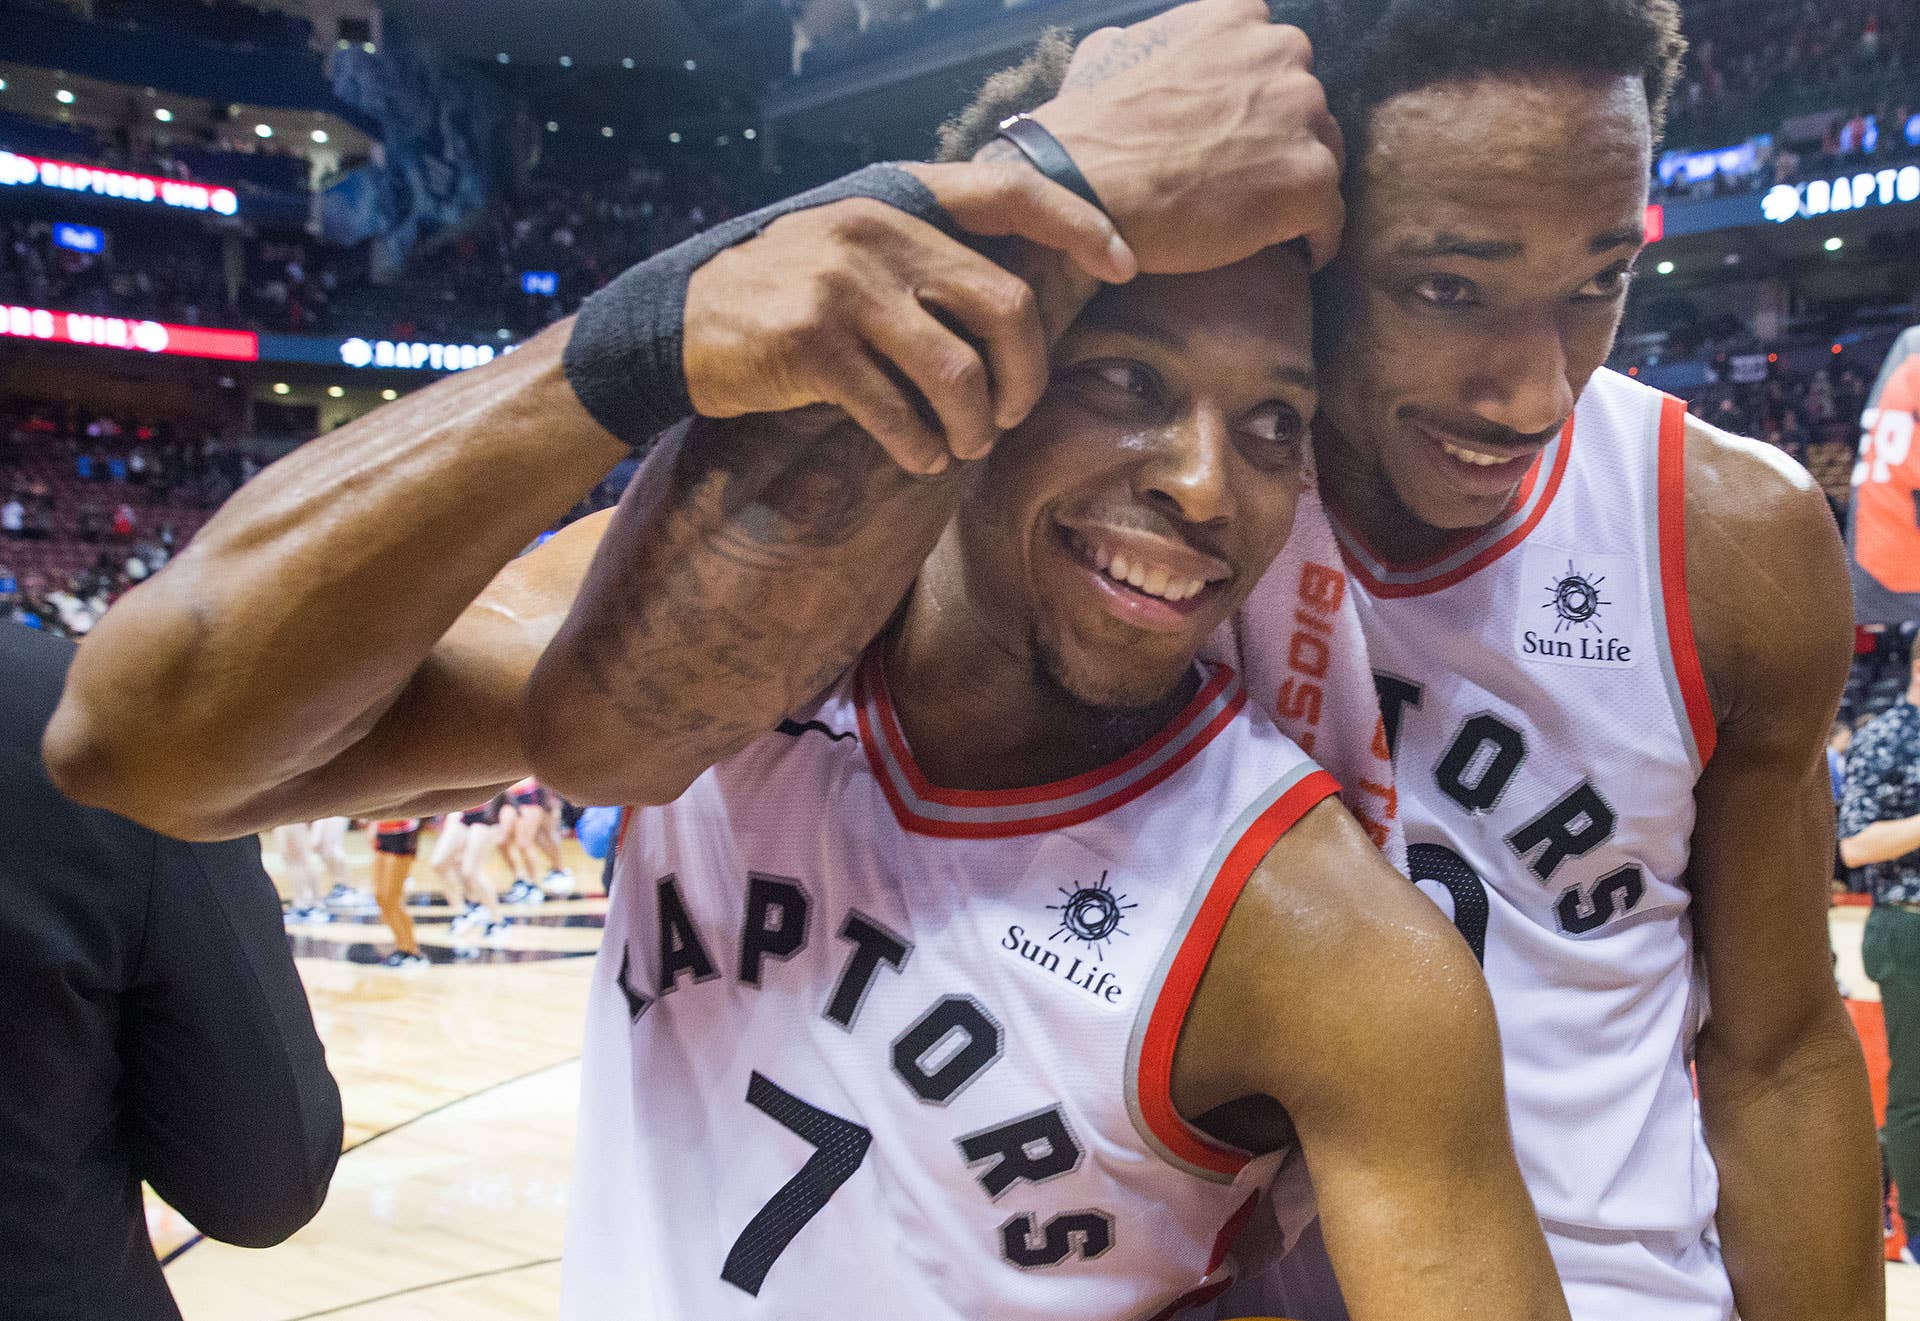 Kyle Lowry and DeMar Derozan hugging while playing for the Toronto Raptors